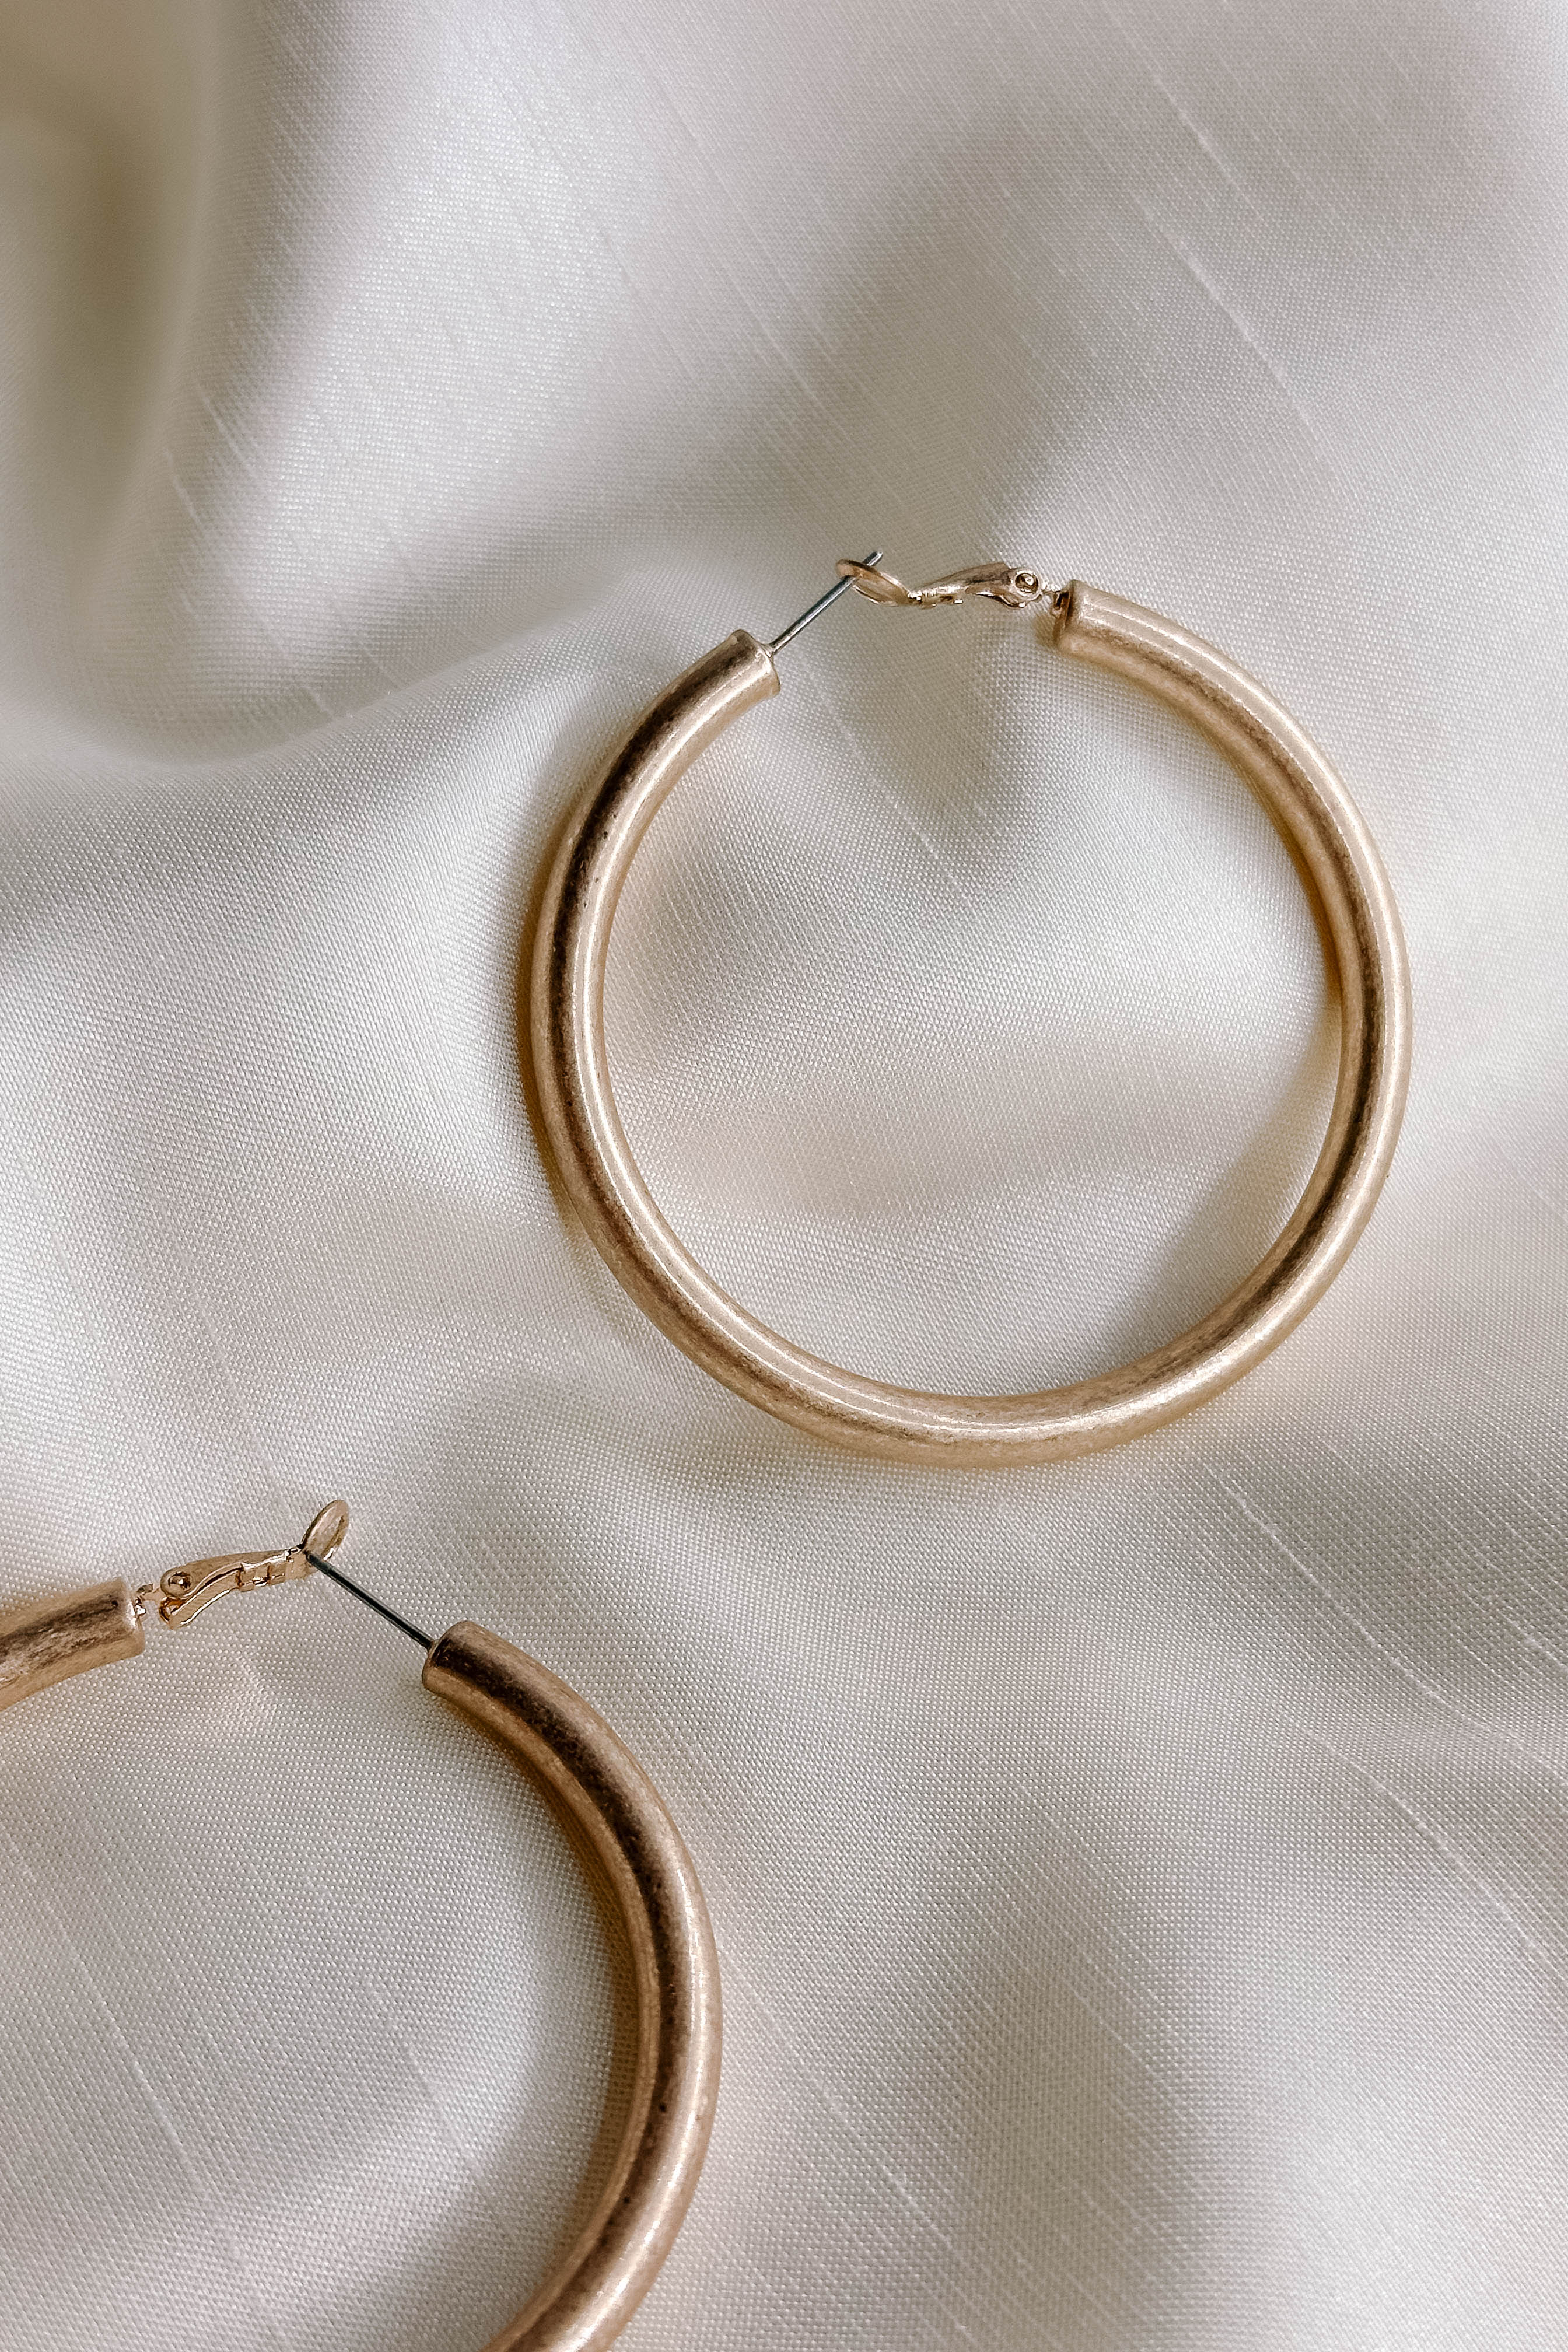 Close up single view of the Lucy Gold Brushed Hoop Earrings that features closed, medium brushed gold hoops with a hinged closure, shown on cream fabric.